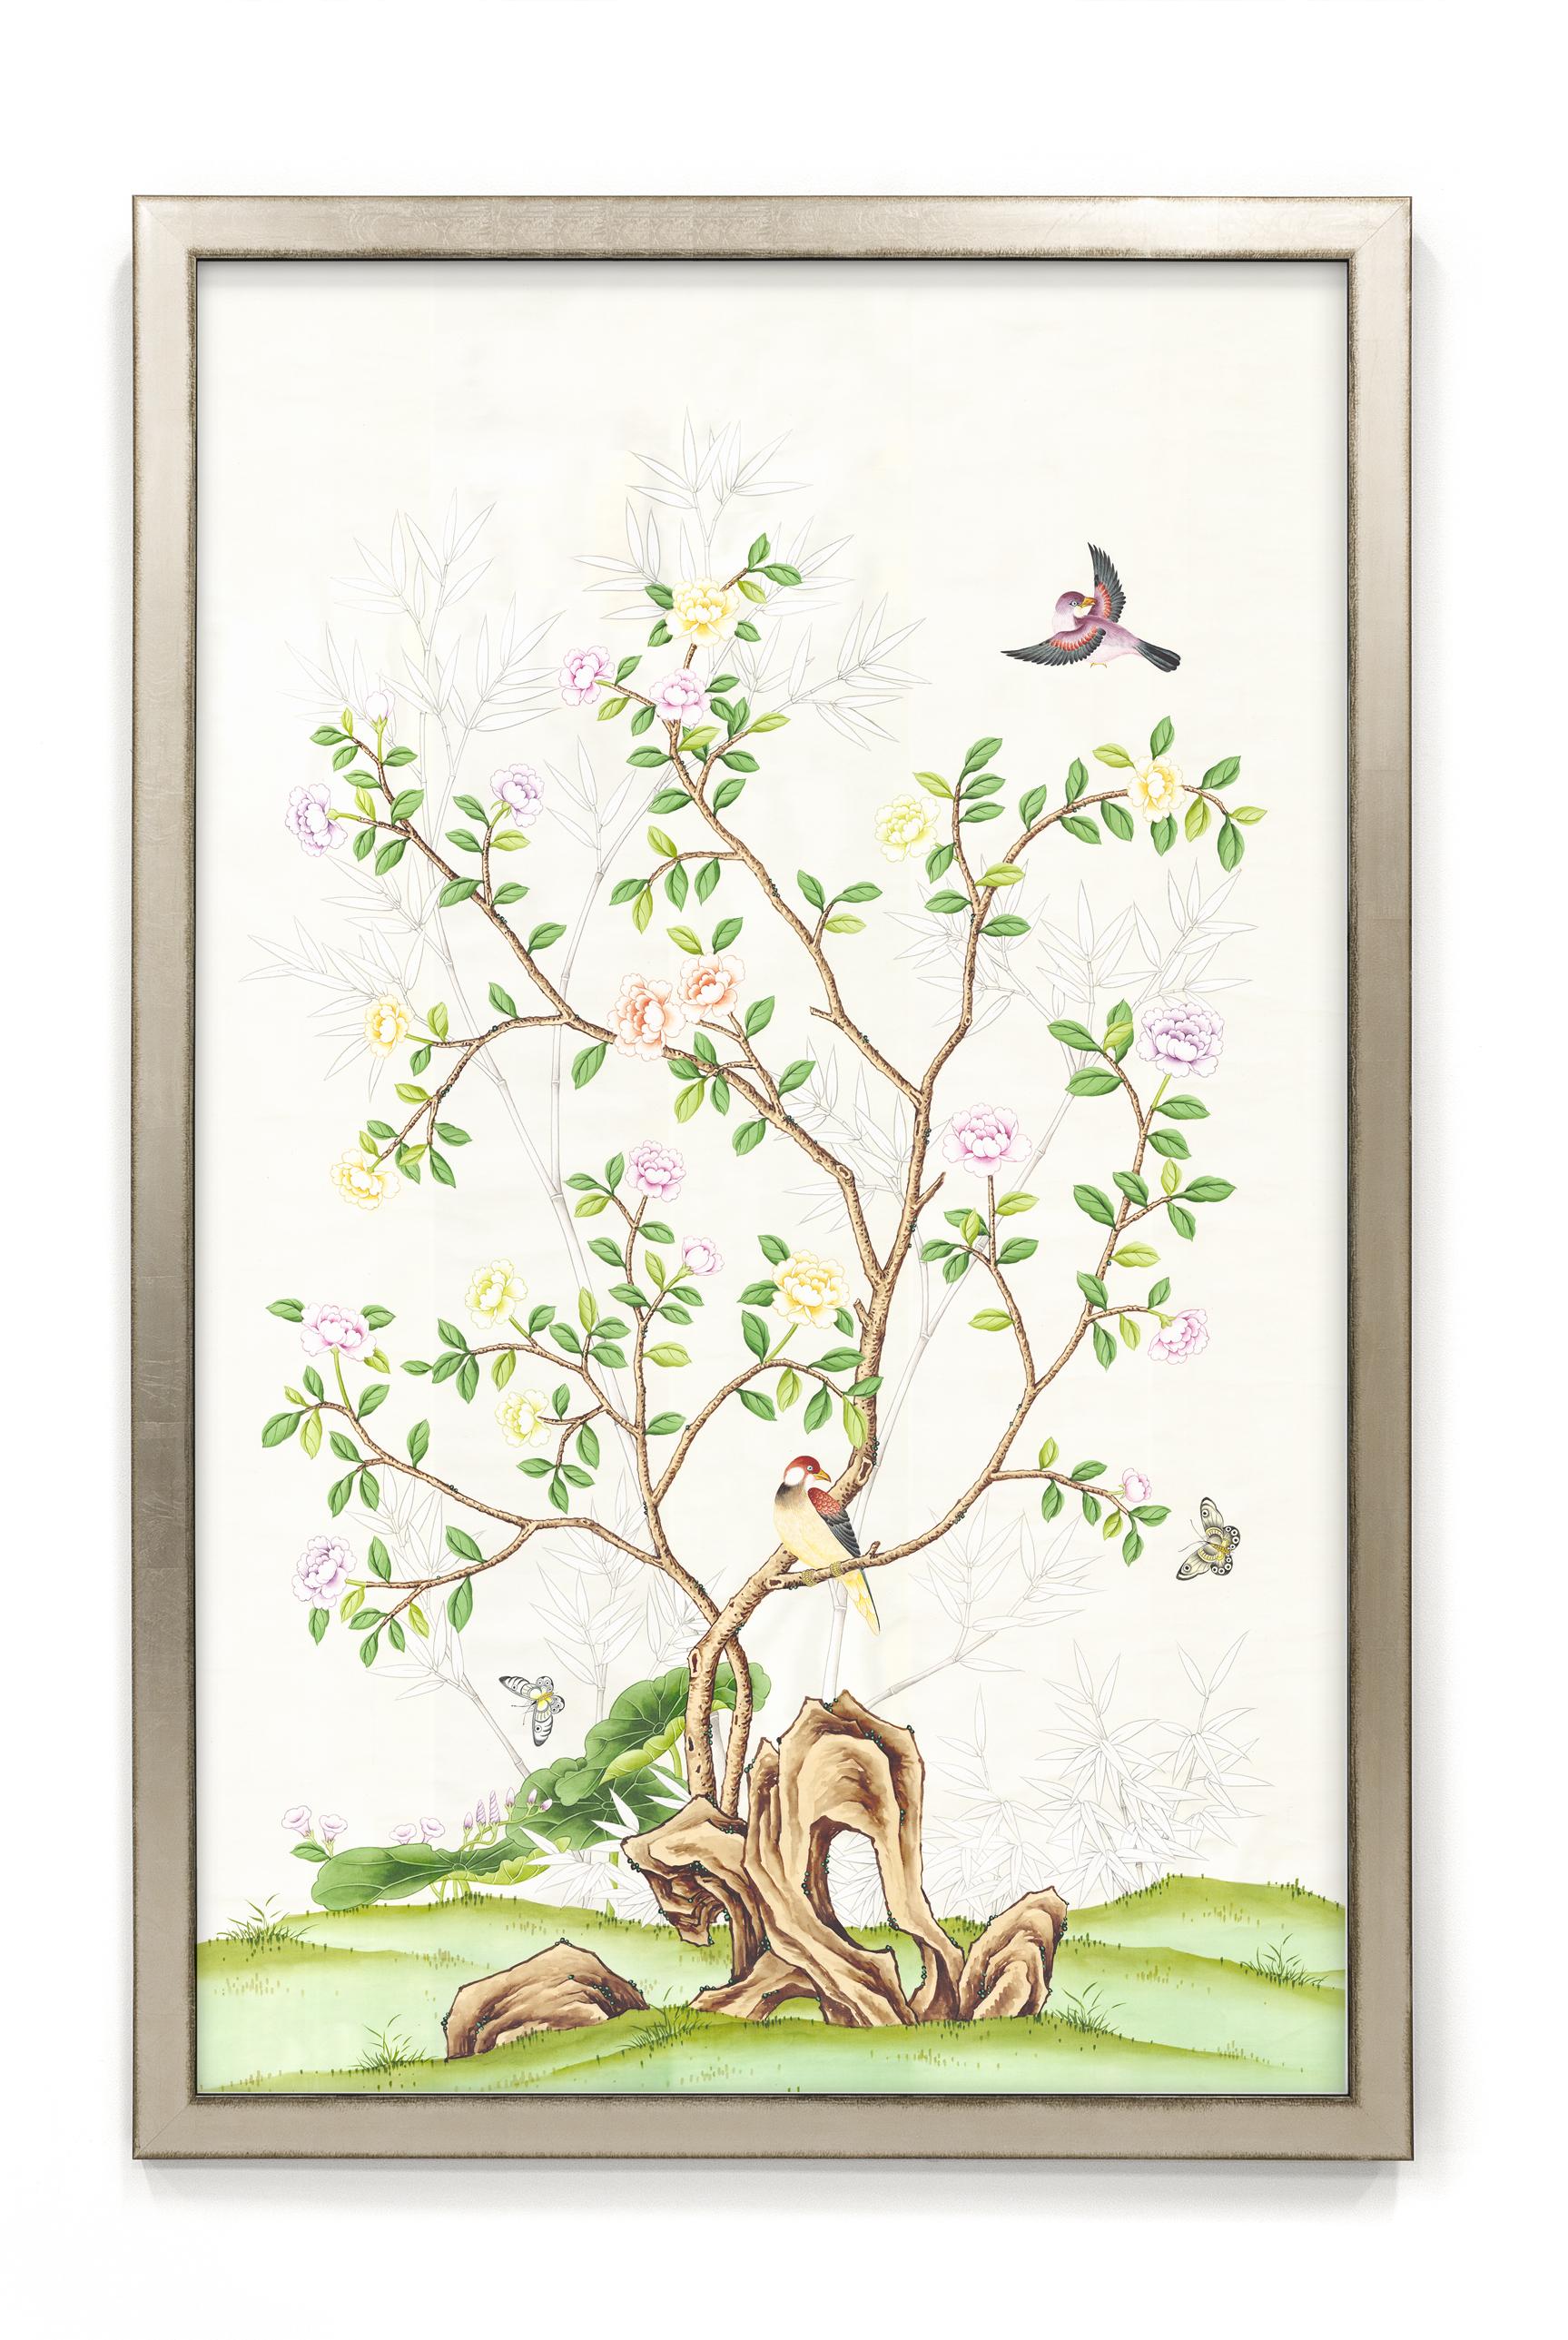 Spring is a pair of hand painted pieces of artwork depicting exotic birds on stylized rock surround by trees. The artwork is hand painted using wash and opaques in a classic Chinoiserie style. These two art pieces have already been framed, and are